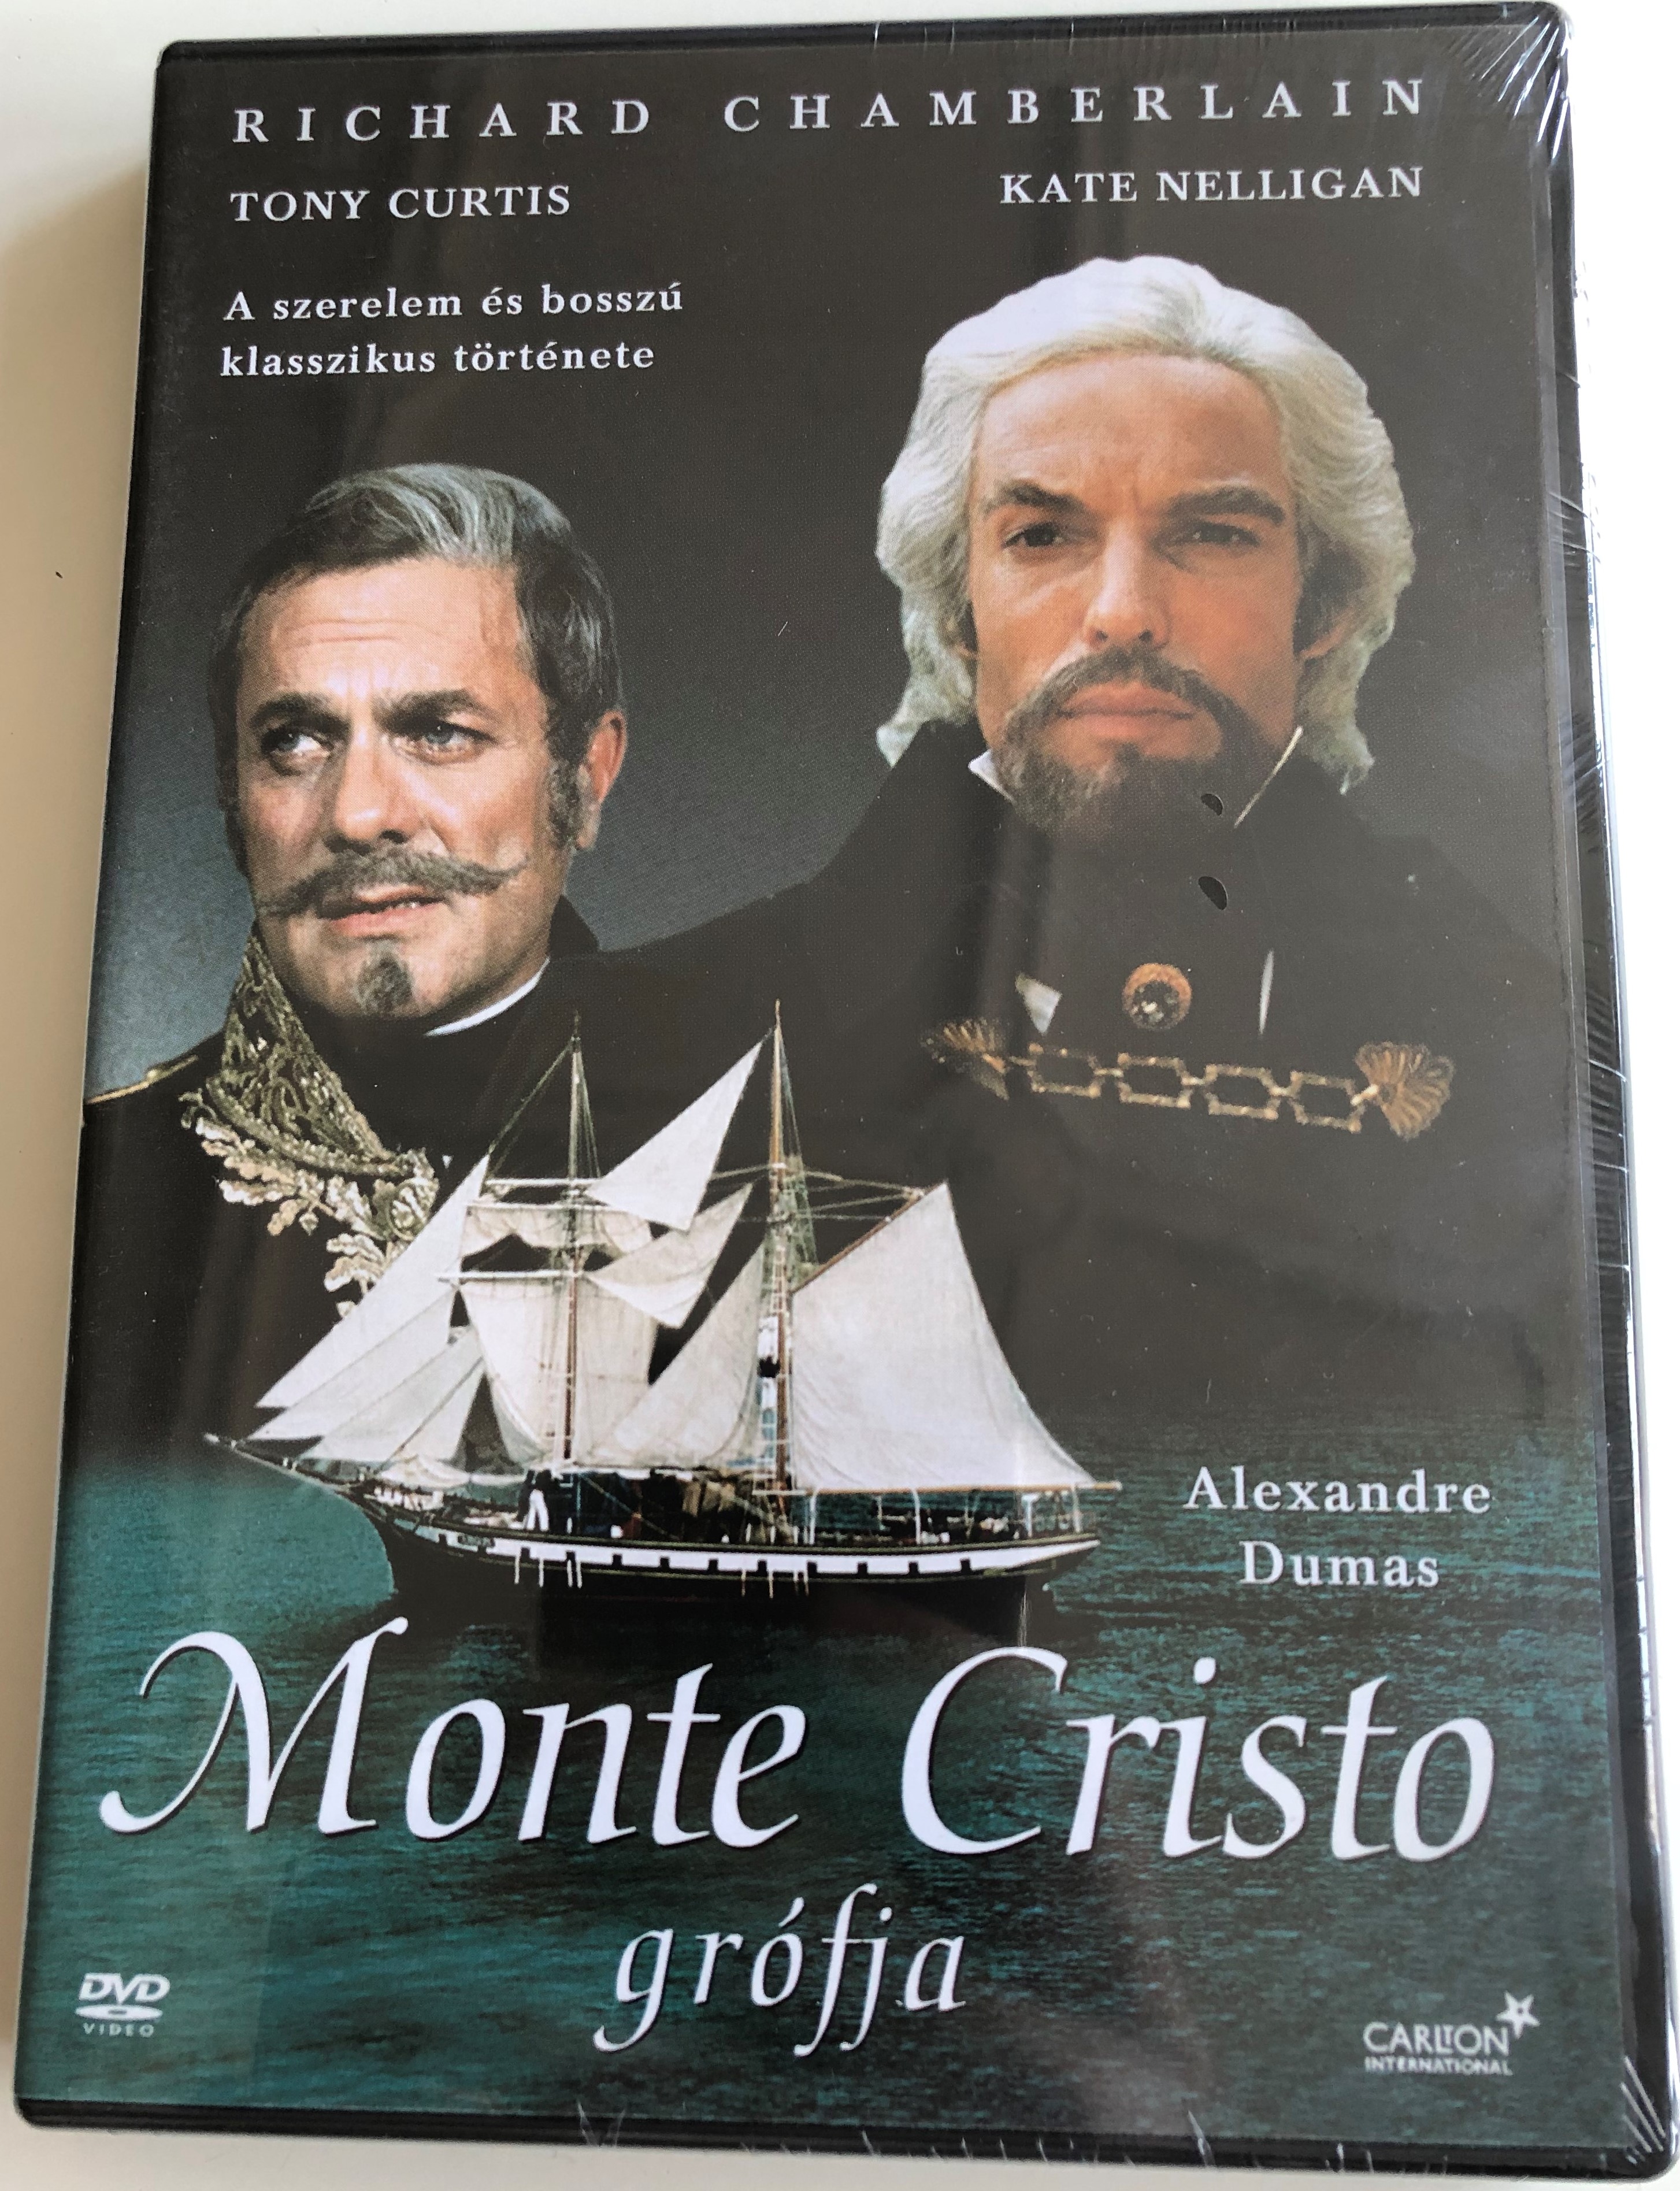 The Count of Monte Cristo DVD 1975 Monte Cristo grófja / Directed by David  Greene / Starring: Richard Chamberlain, Kate Nelligan, Tony Curtis, Donald  Pleasence - Bible in My Language